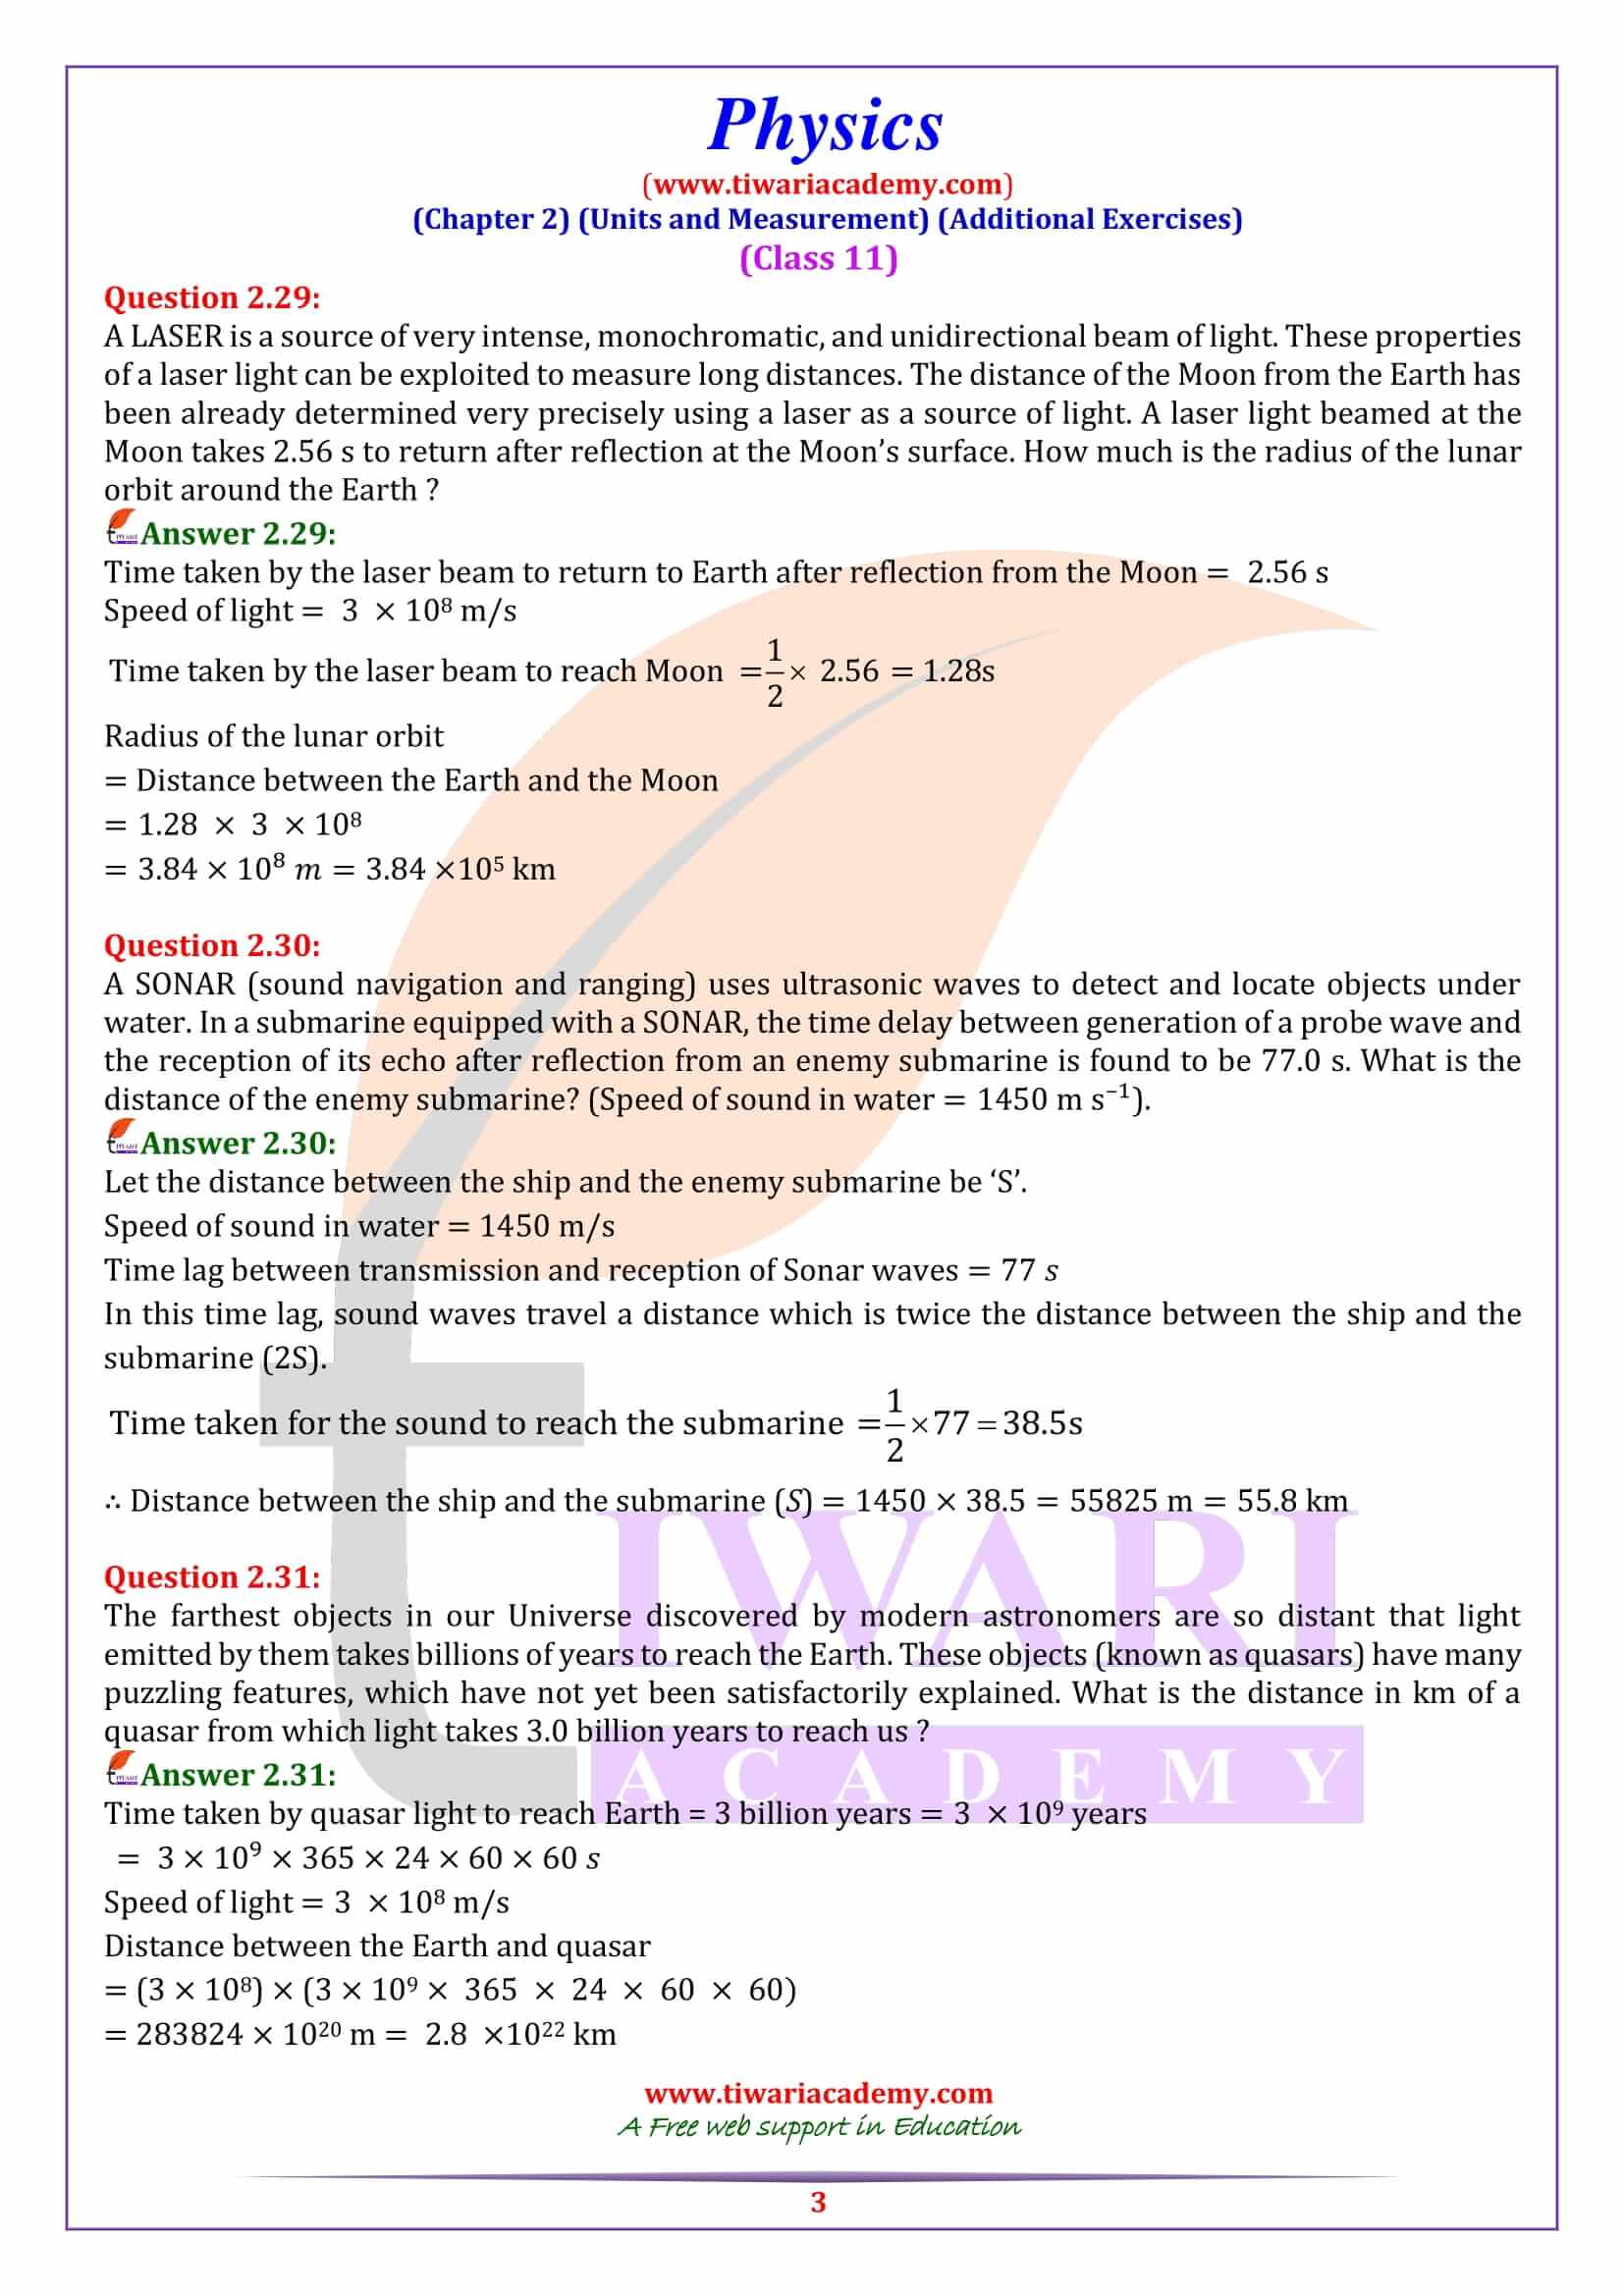 NCERT Solutions for Class 11 Physics Chapter 2 question answers